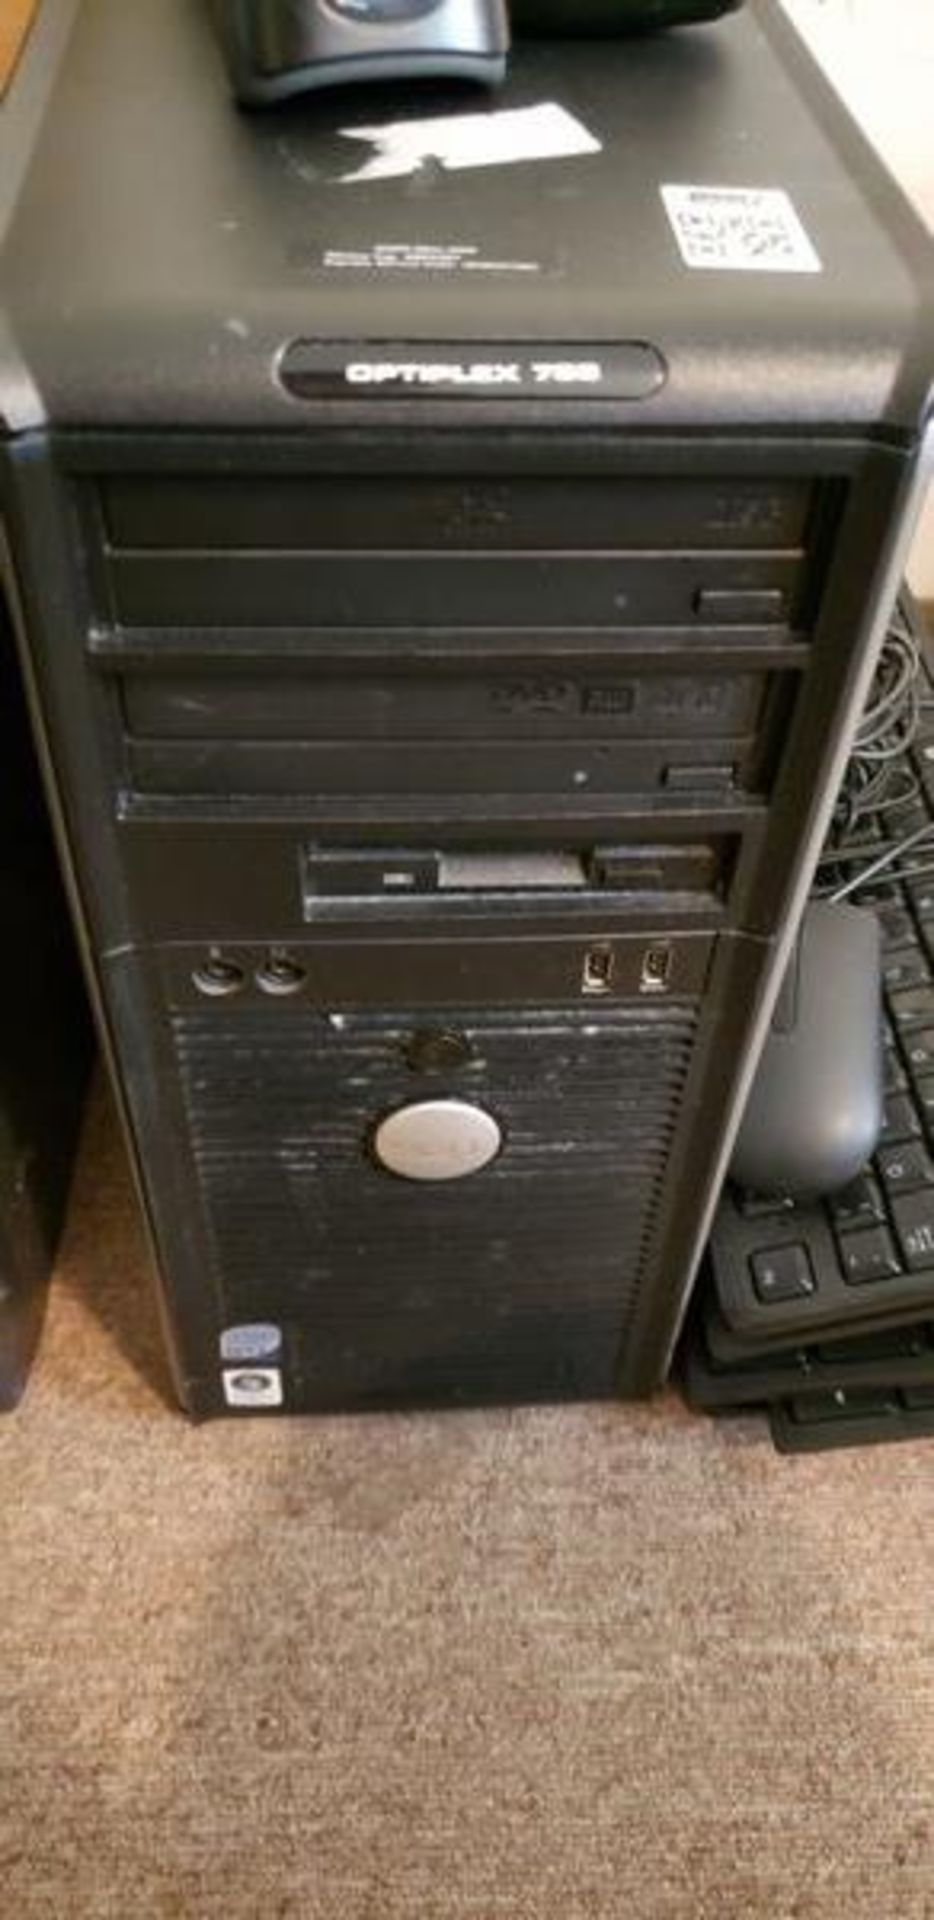 3 ASSORTED DESKTOP COMPUTERS WITH MONITORS, KEYBOARDS, MICE, AND SCANNER - Image 9 of 13